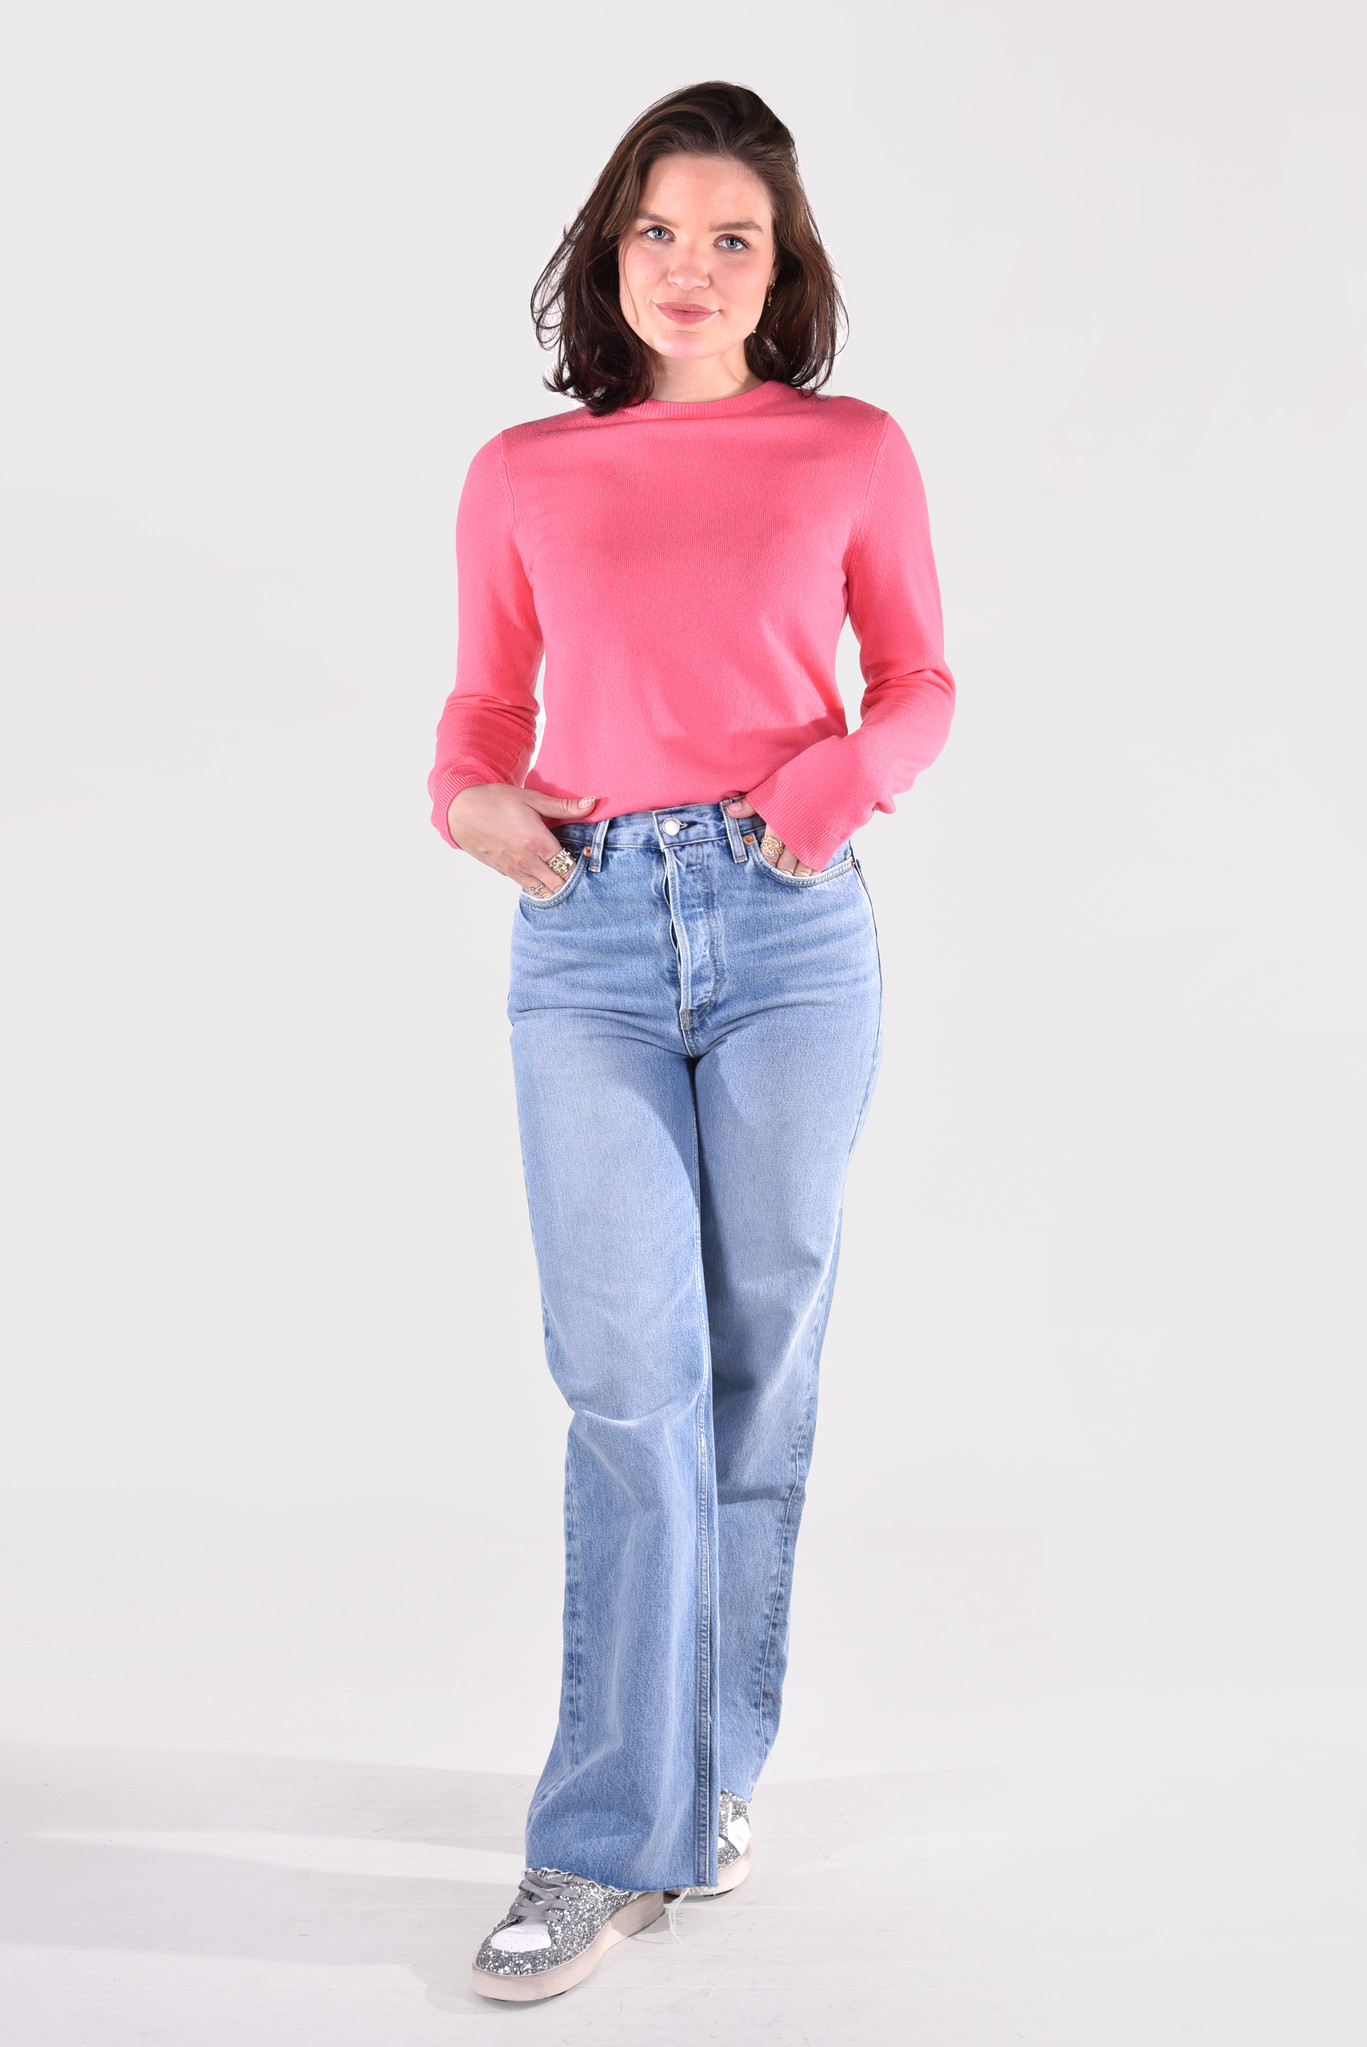 Productafbeelding: Peopleapos s Republic of Cashmere trui Roundneck 3092 roze